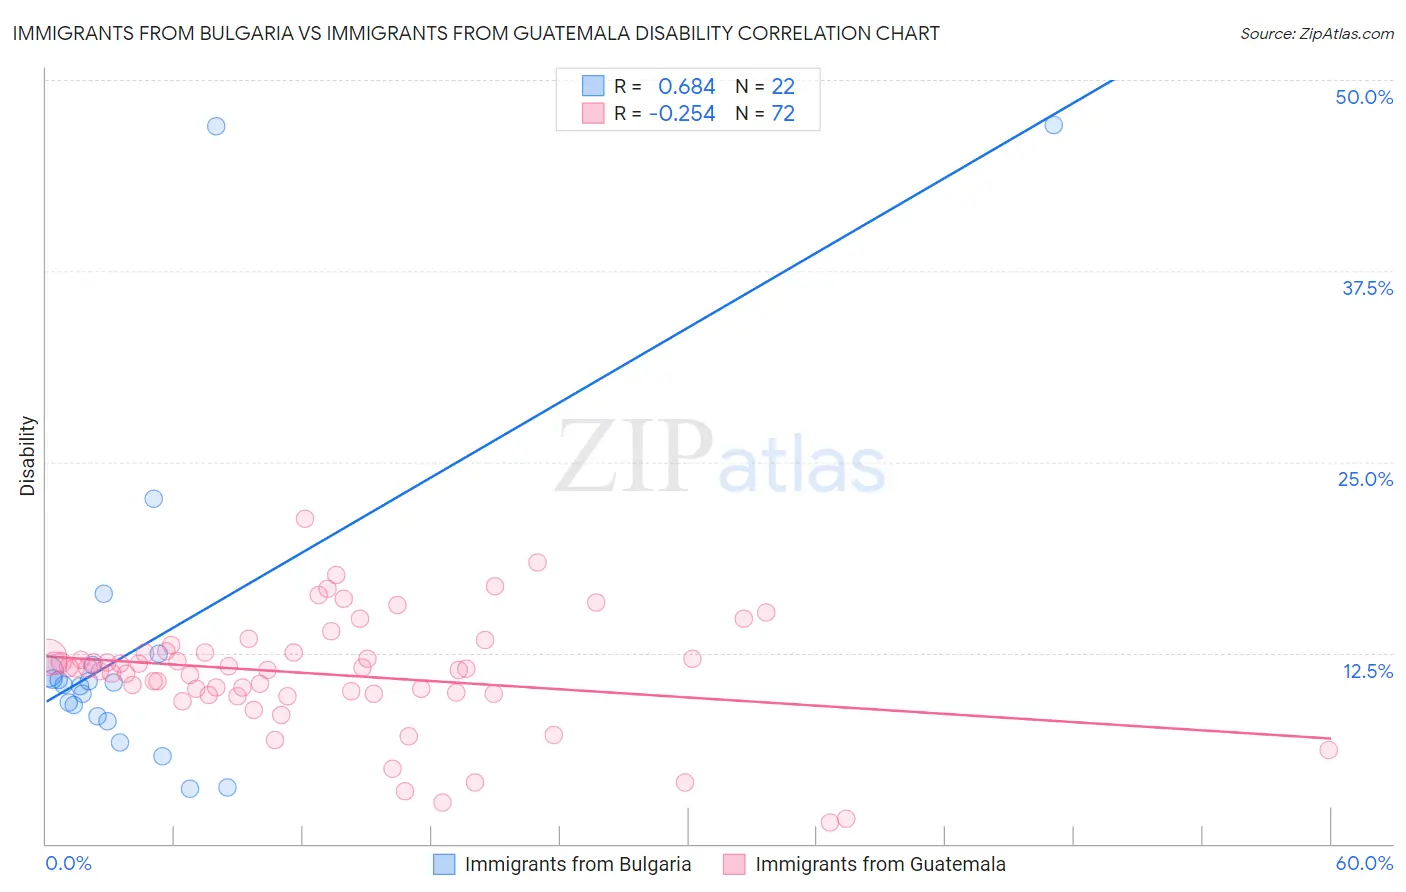 Immigrants from Bulgaria vs Immigrants from Guatemala Disability